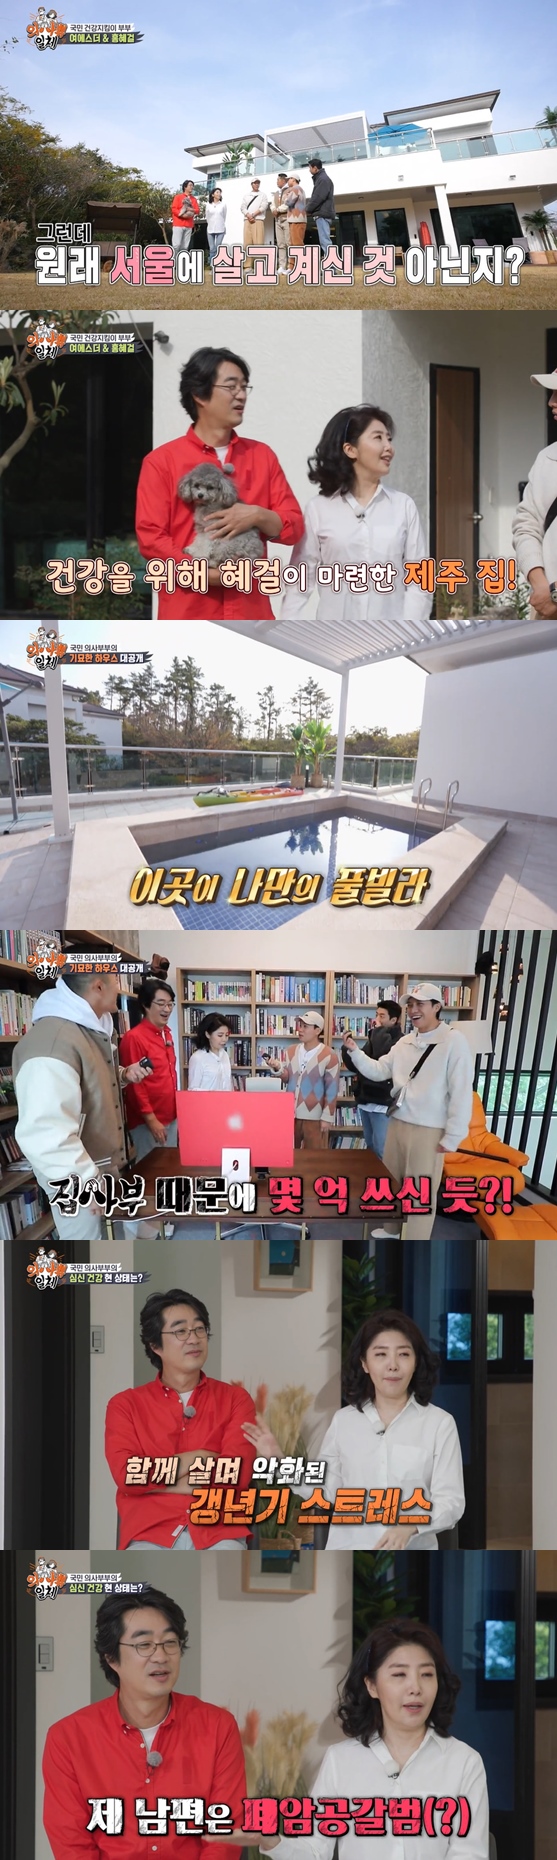 On SBS All The Butlers broadcasted on the last 5 days, the doctors couple Yeo Esther and Hong Hye-geol appeared and told Jeju Island life.On this day, Yeo Esther and Hong Hye-geol welcomed the members of All The Butlers at the Jeju Island house.Yang Se-chan asked, When I saw it on the air, I thought you lived in Seoul, but did you move here?Yeo Esther replied that Husband has set up a house in Jeju Island for health and Hong Hye-geol added that all the gardens have been interiorized.Hong Hye-geol, who planted reeds for the broadcast last day.Yeo Esther said, Husband is shooting All The Butlers, so I moved the baggage in Seoul to the ship.The interior of the house, which reminds me of the model house, has attracted the attention of viewers.In particular, Hong Hye-geol attracted attention by saying that he slept with an axe for self-defense next to the bed.The second floor was a space for Yeo Esther, with a vast terrace, a dedicated pool and a large study drawing attention.Yang Se-chan said, I think I spent a few billions because of All The Butlers, and Kim Dong-Hyun said, Did not you buy this house?The couple, Hong Hye-geol, who is not in each room, said, The rumor is that I was taken by my wife and went to Jeju Island.I did not want to look like a man living alone, so I decorated it more colorfully. Yeo Esther said, We decided to maintain a friendly indifference because of health. As we became menopausal with each other, I was hurt and Husband said that I appeared in my dream and nagged.I wanted to live separately for each others Immunity. Yeo Esther said, If you are stressed, your Immunity will drop. I am really improved in Immunity and my mind has stabilized a lot.Husband seems to be happy, and there is a better indicator of health. Hong Hye-geol said: My wife has a lot of chronic illnesses, but shes a doctor, but she has cerebral aneurysms, asthma, depression and multiple medications.I also have several discs, tuberculosis, and liver Kwon Yuri shade just before lung cancer. Do not think seriously, our Husband is a lung cancer hijack, said Yeo Esther, who listened to this. It is not lung cancer, but it is lung cancer.Hong Hye-geol said, The reason I came here was that I had a strange thing in my lungs when I was checking out, and a cloudy shade came out on CT that it was a Kwon Yuri shade.If you take this off, there are more than 90% of cancer cells, but this does not develop into cancer, but it is still quiet. I posted it on SNS and it said that the article said lung cancer, and I was cursed for being a national irrigation. I think Im coming to Jeju Island and training, and I feel better, he explained.Photo: SBS broadcast screen